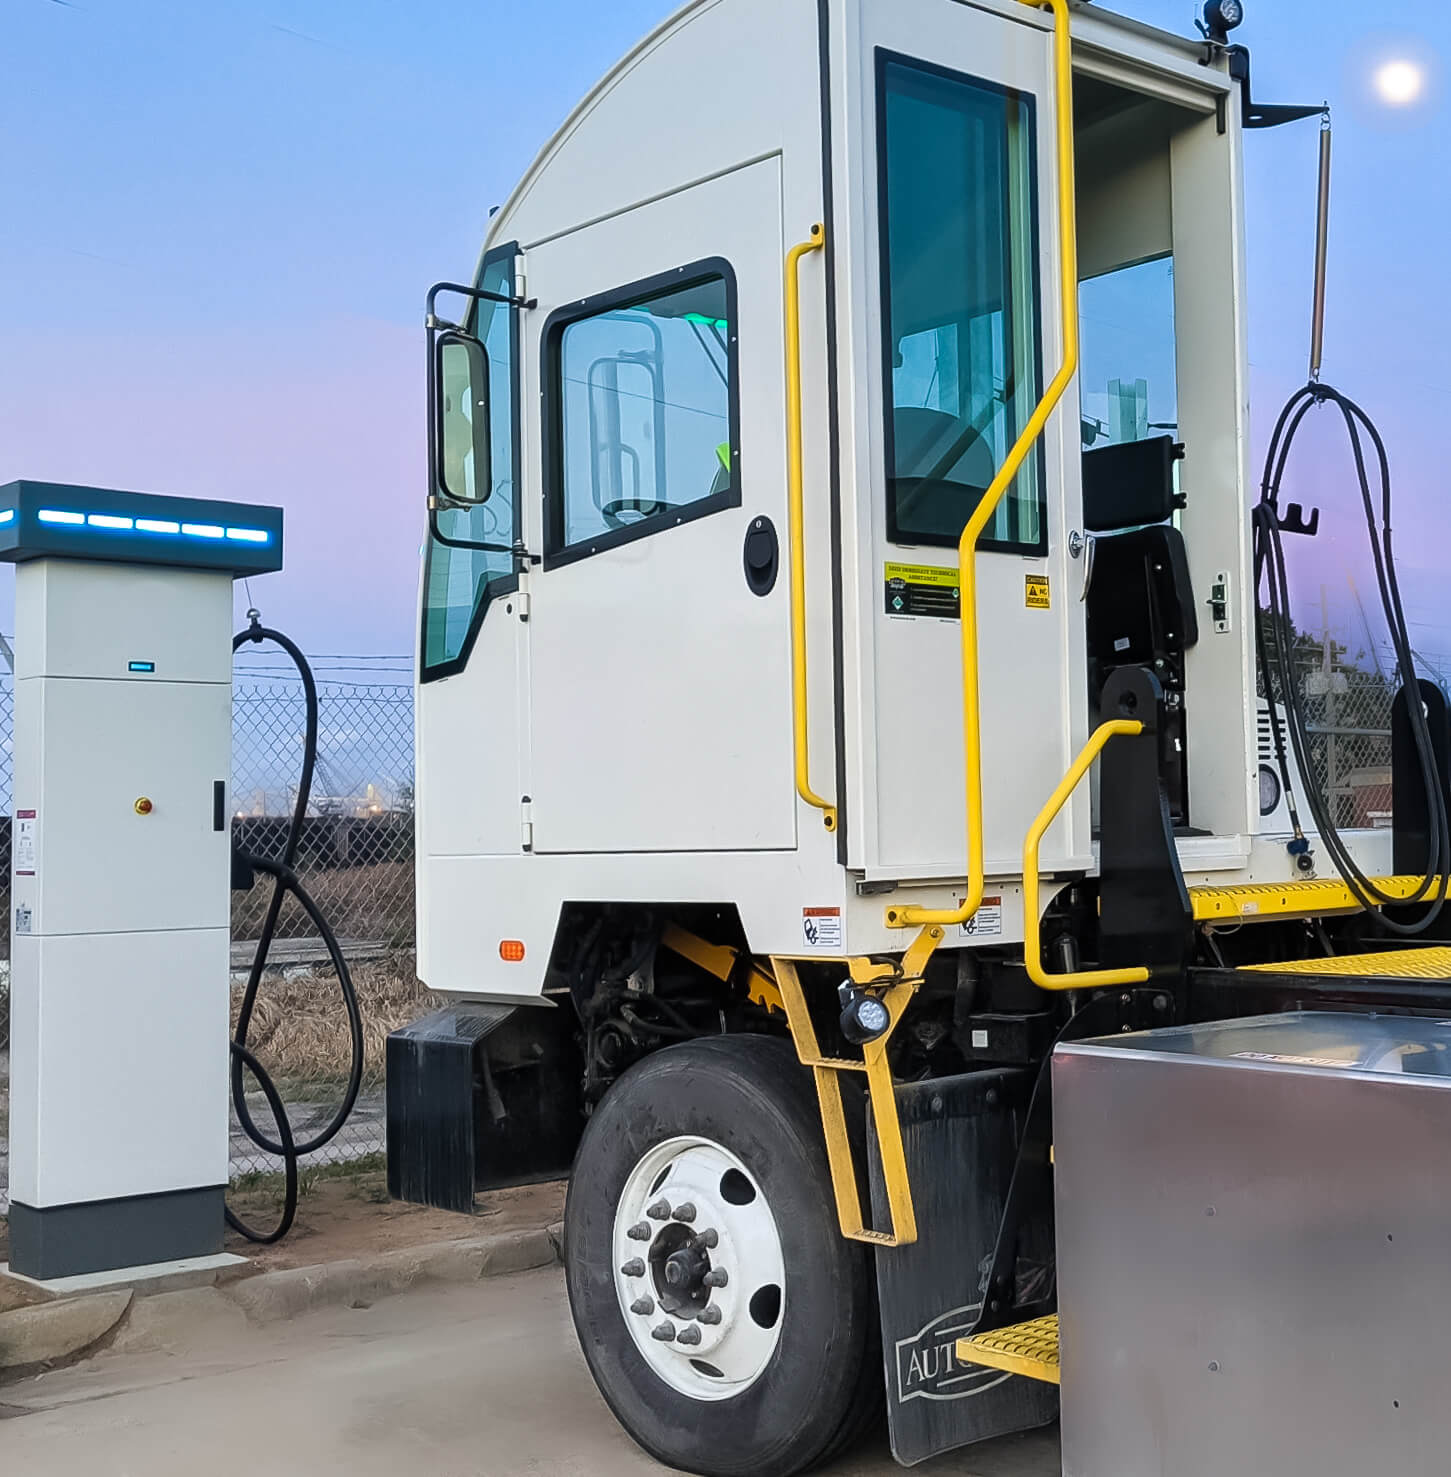 E-ACTT All-Electric Severe-Duty Terminal Tractor gets the job done with zero emissions.